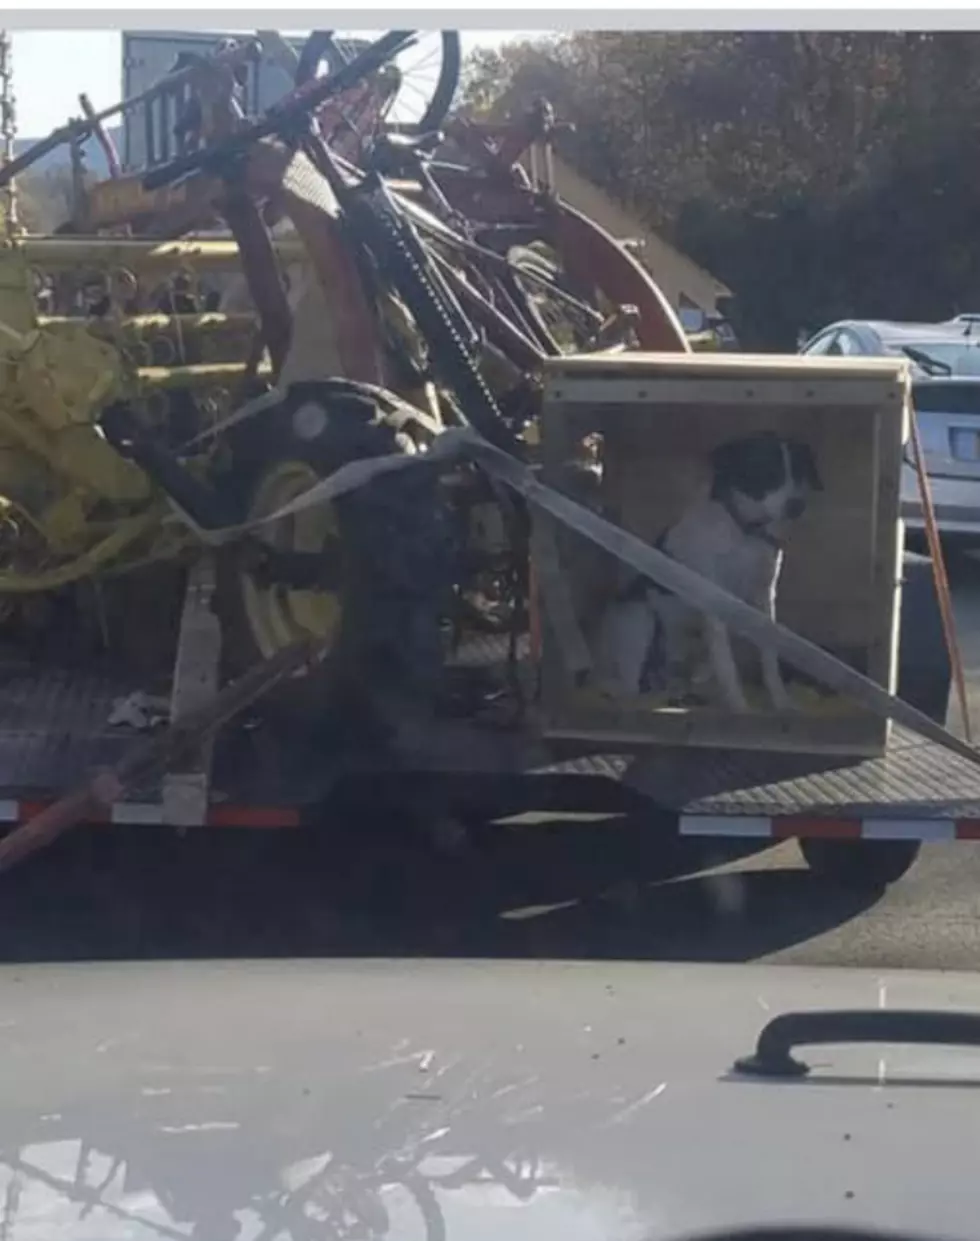 Pic of Dog Being Transported in HV Sparks Outrage